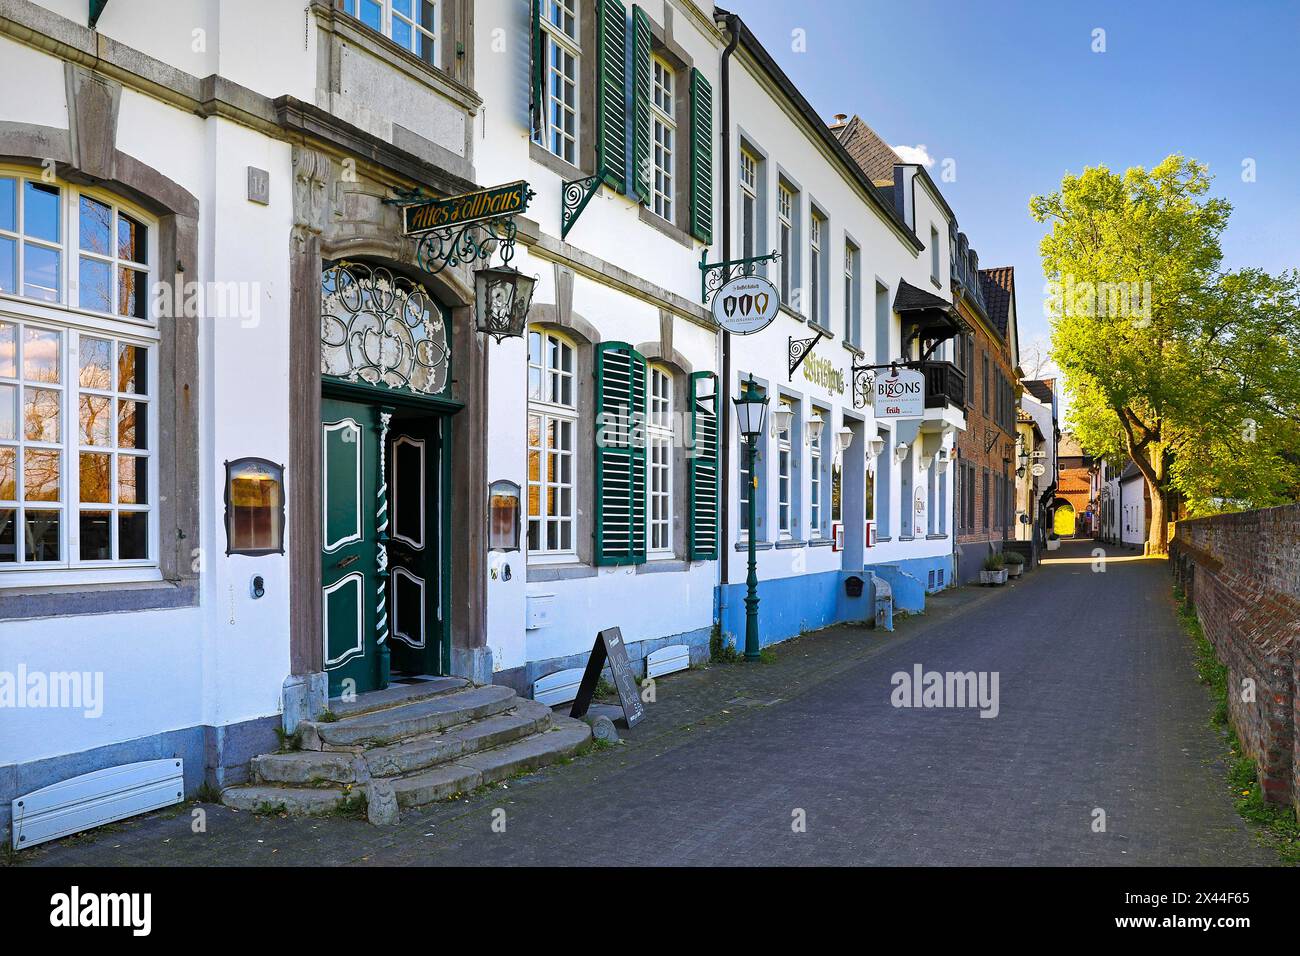 Old town of Zons with the row of houses on Rheinstrasse, Dormagen, Lower Rhine, North Rhine-Westphalia, Germany Stock Photo